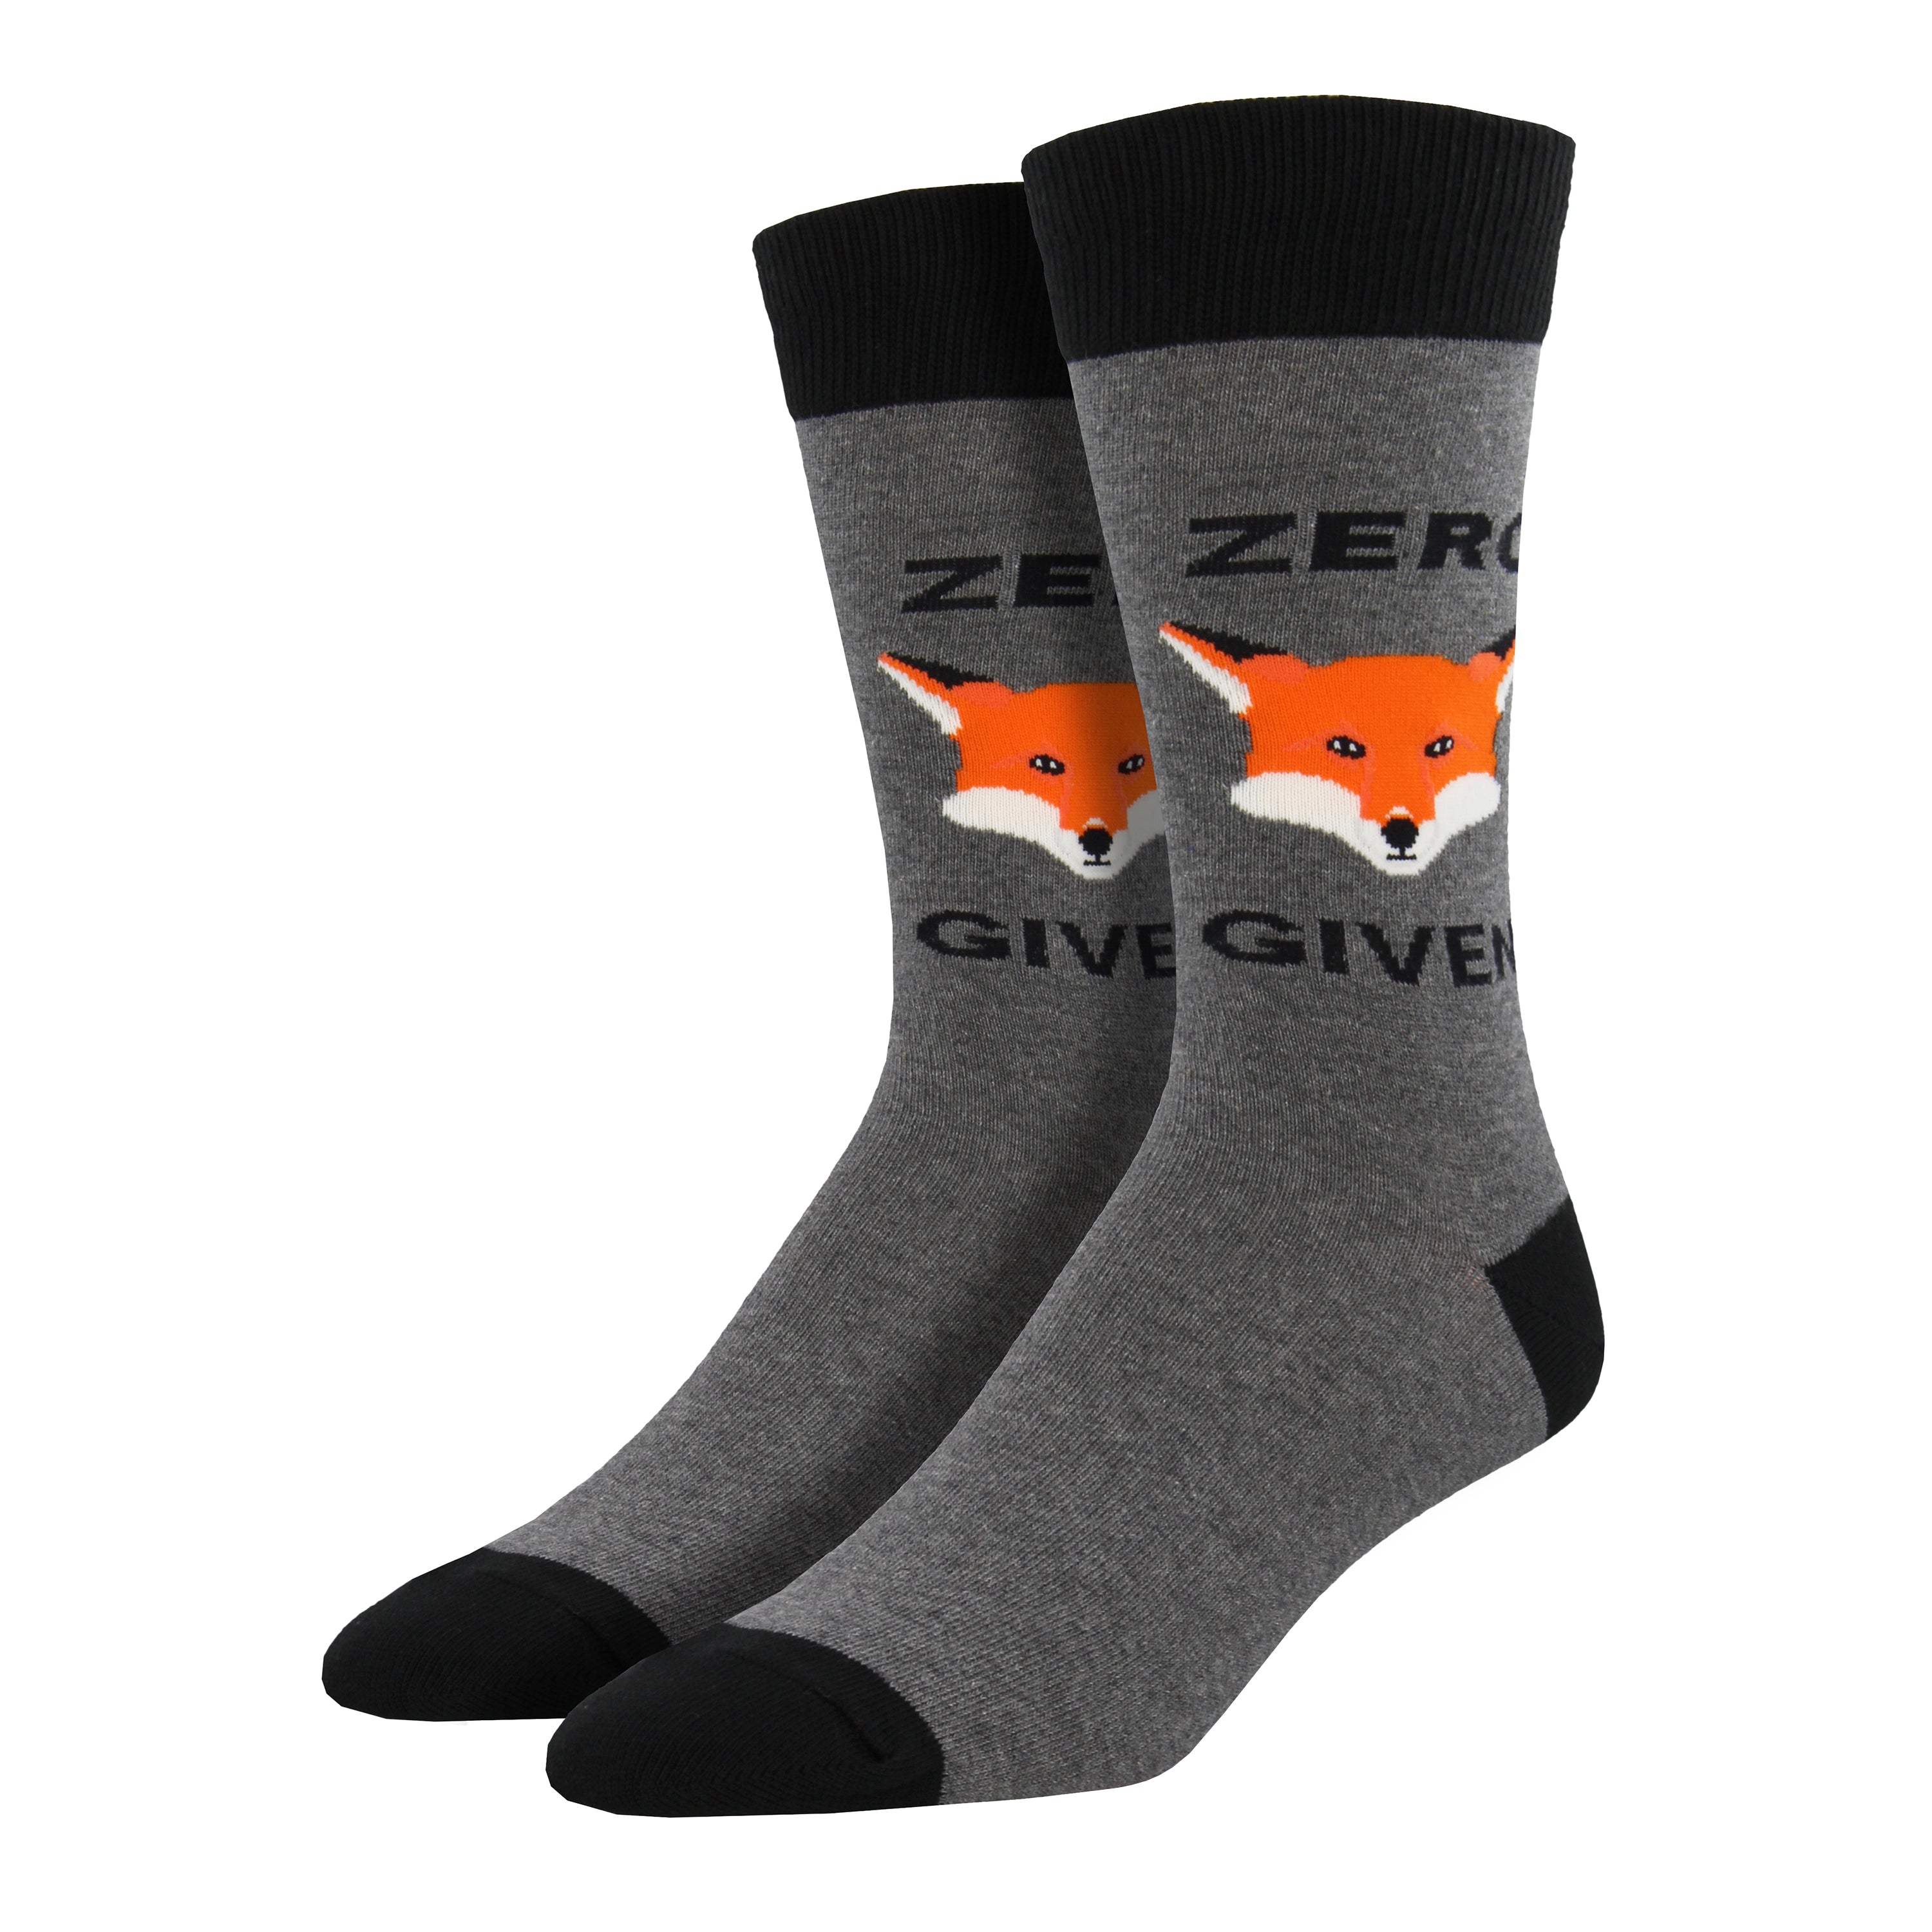 Shown on leg forms, a pair of Socksmith brand men's cotton crew socks in grey with black heel/cuff/toe and a cartoon fox face on the leg. The text on the sock reads, 